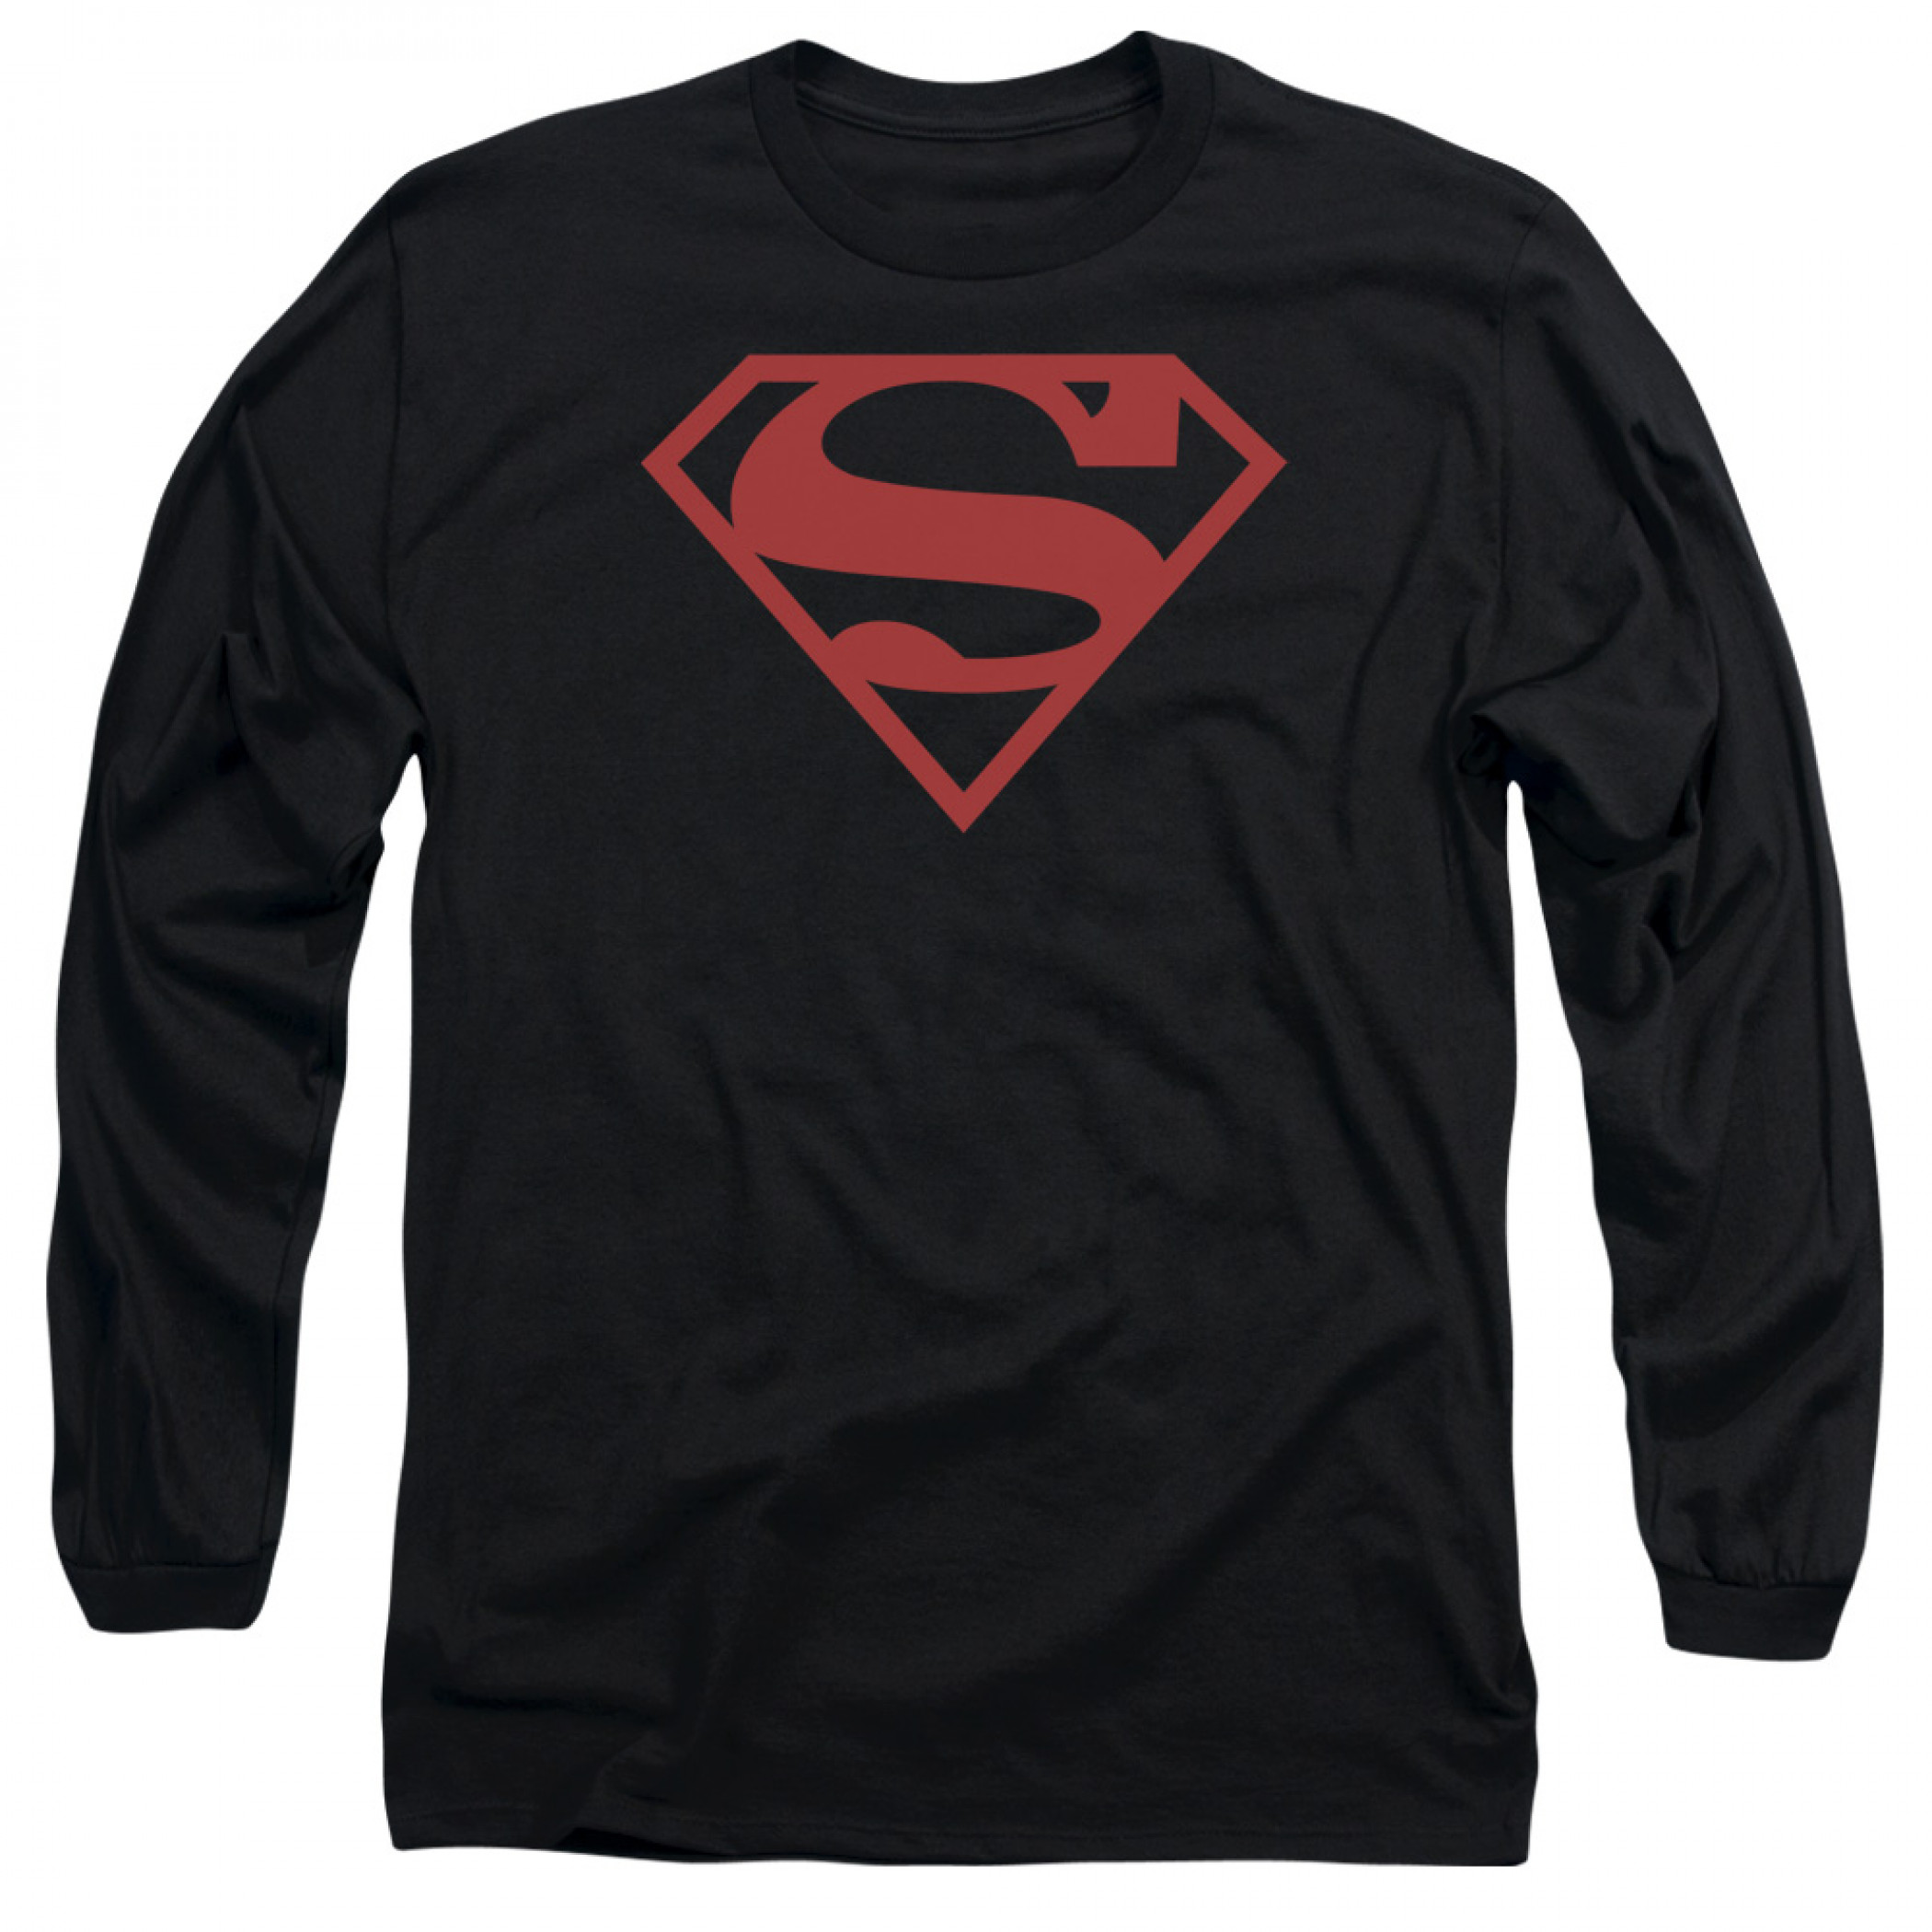 Licensed Superman Youth Medium 10/12 Red Long Sleeve T-Shirt 